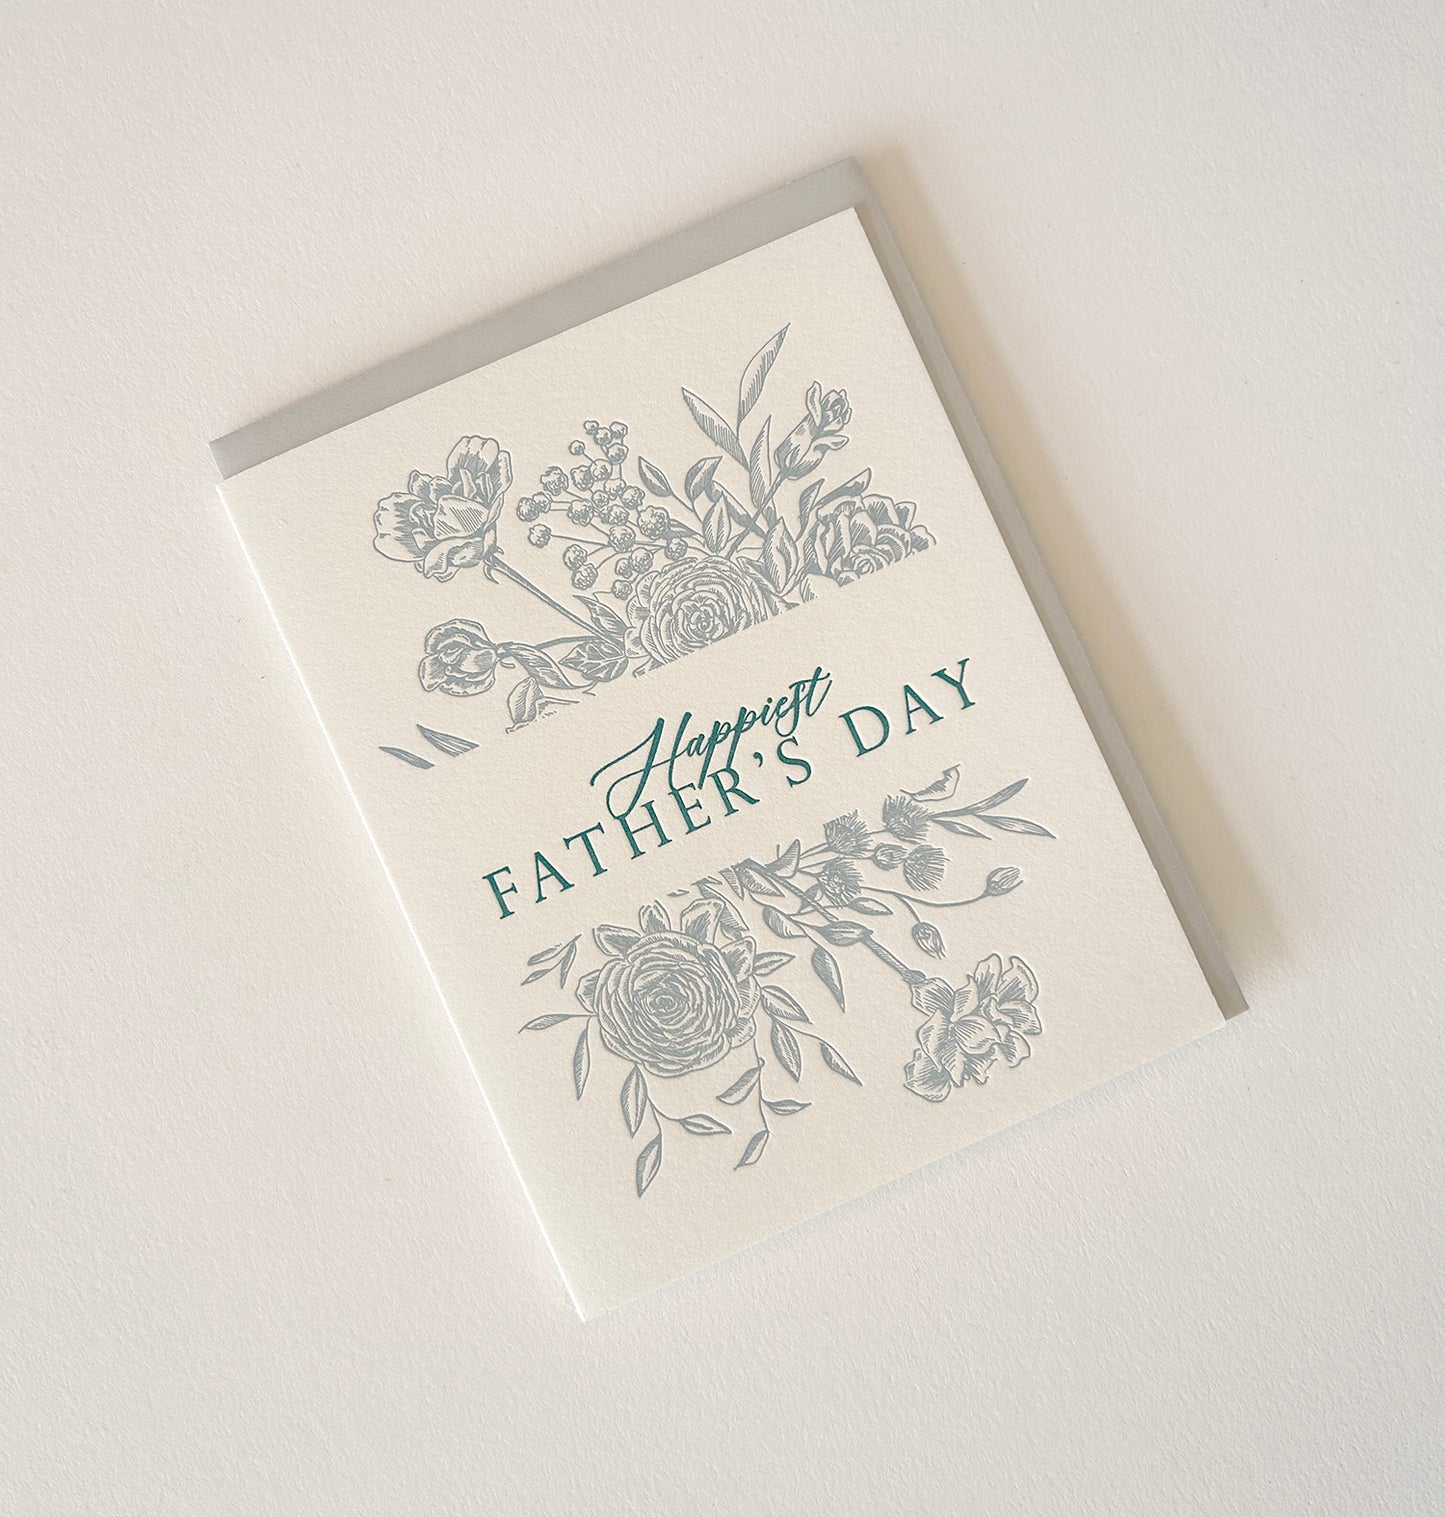 Letterpress father's day card with florals that says "Happy Father's Day" by Rust Belt Love